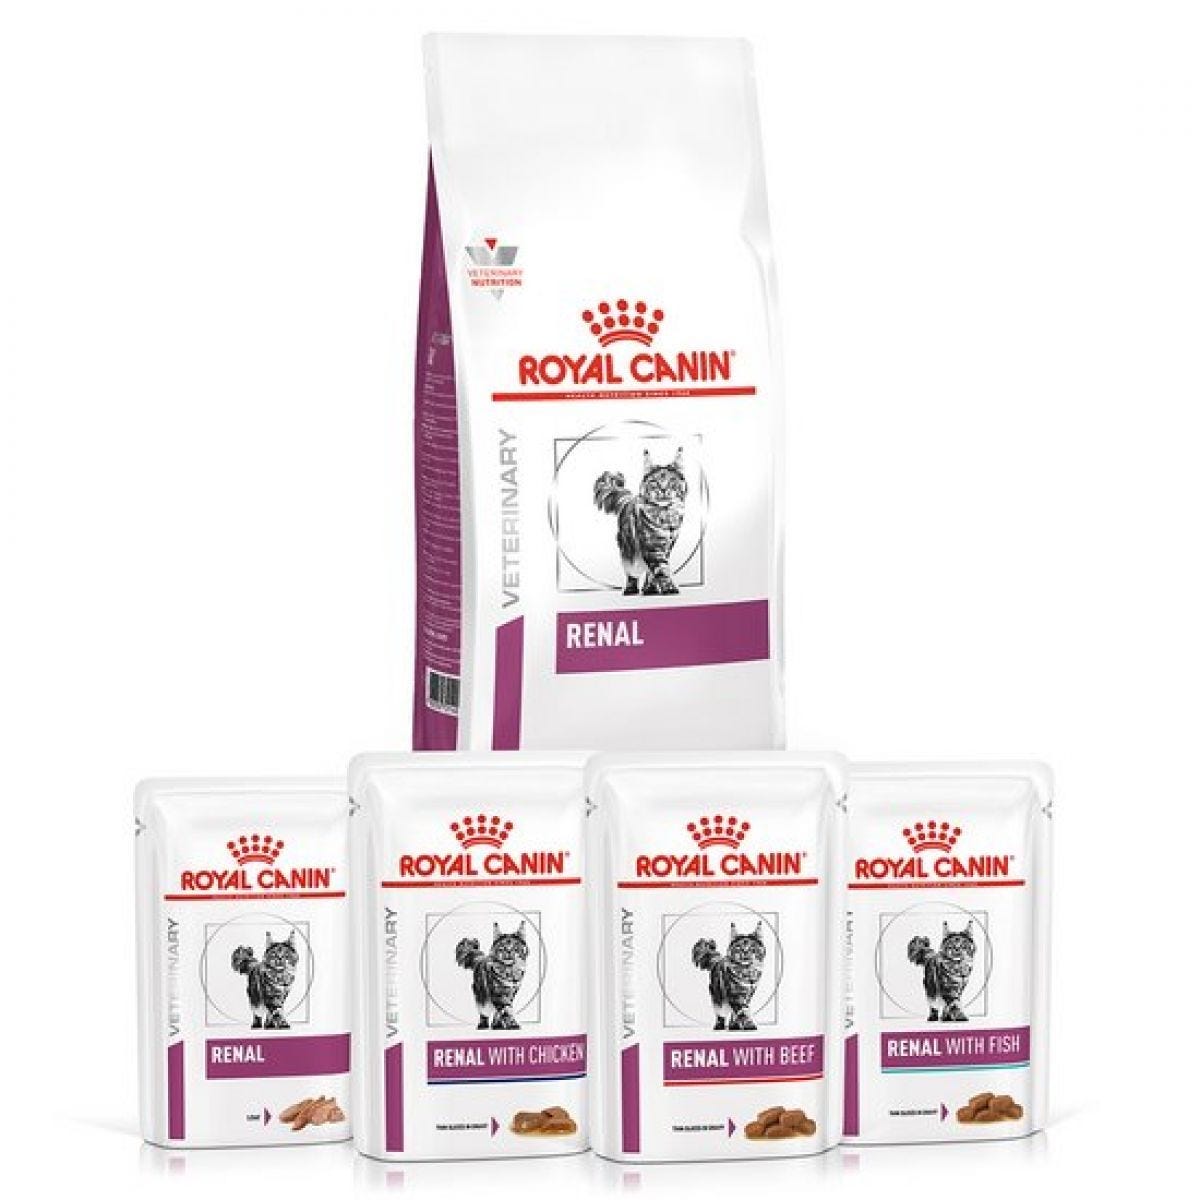 Royal Canin Wet Cat and Dog Food